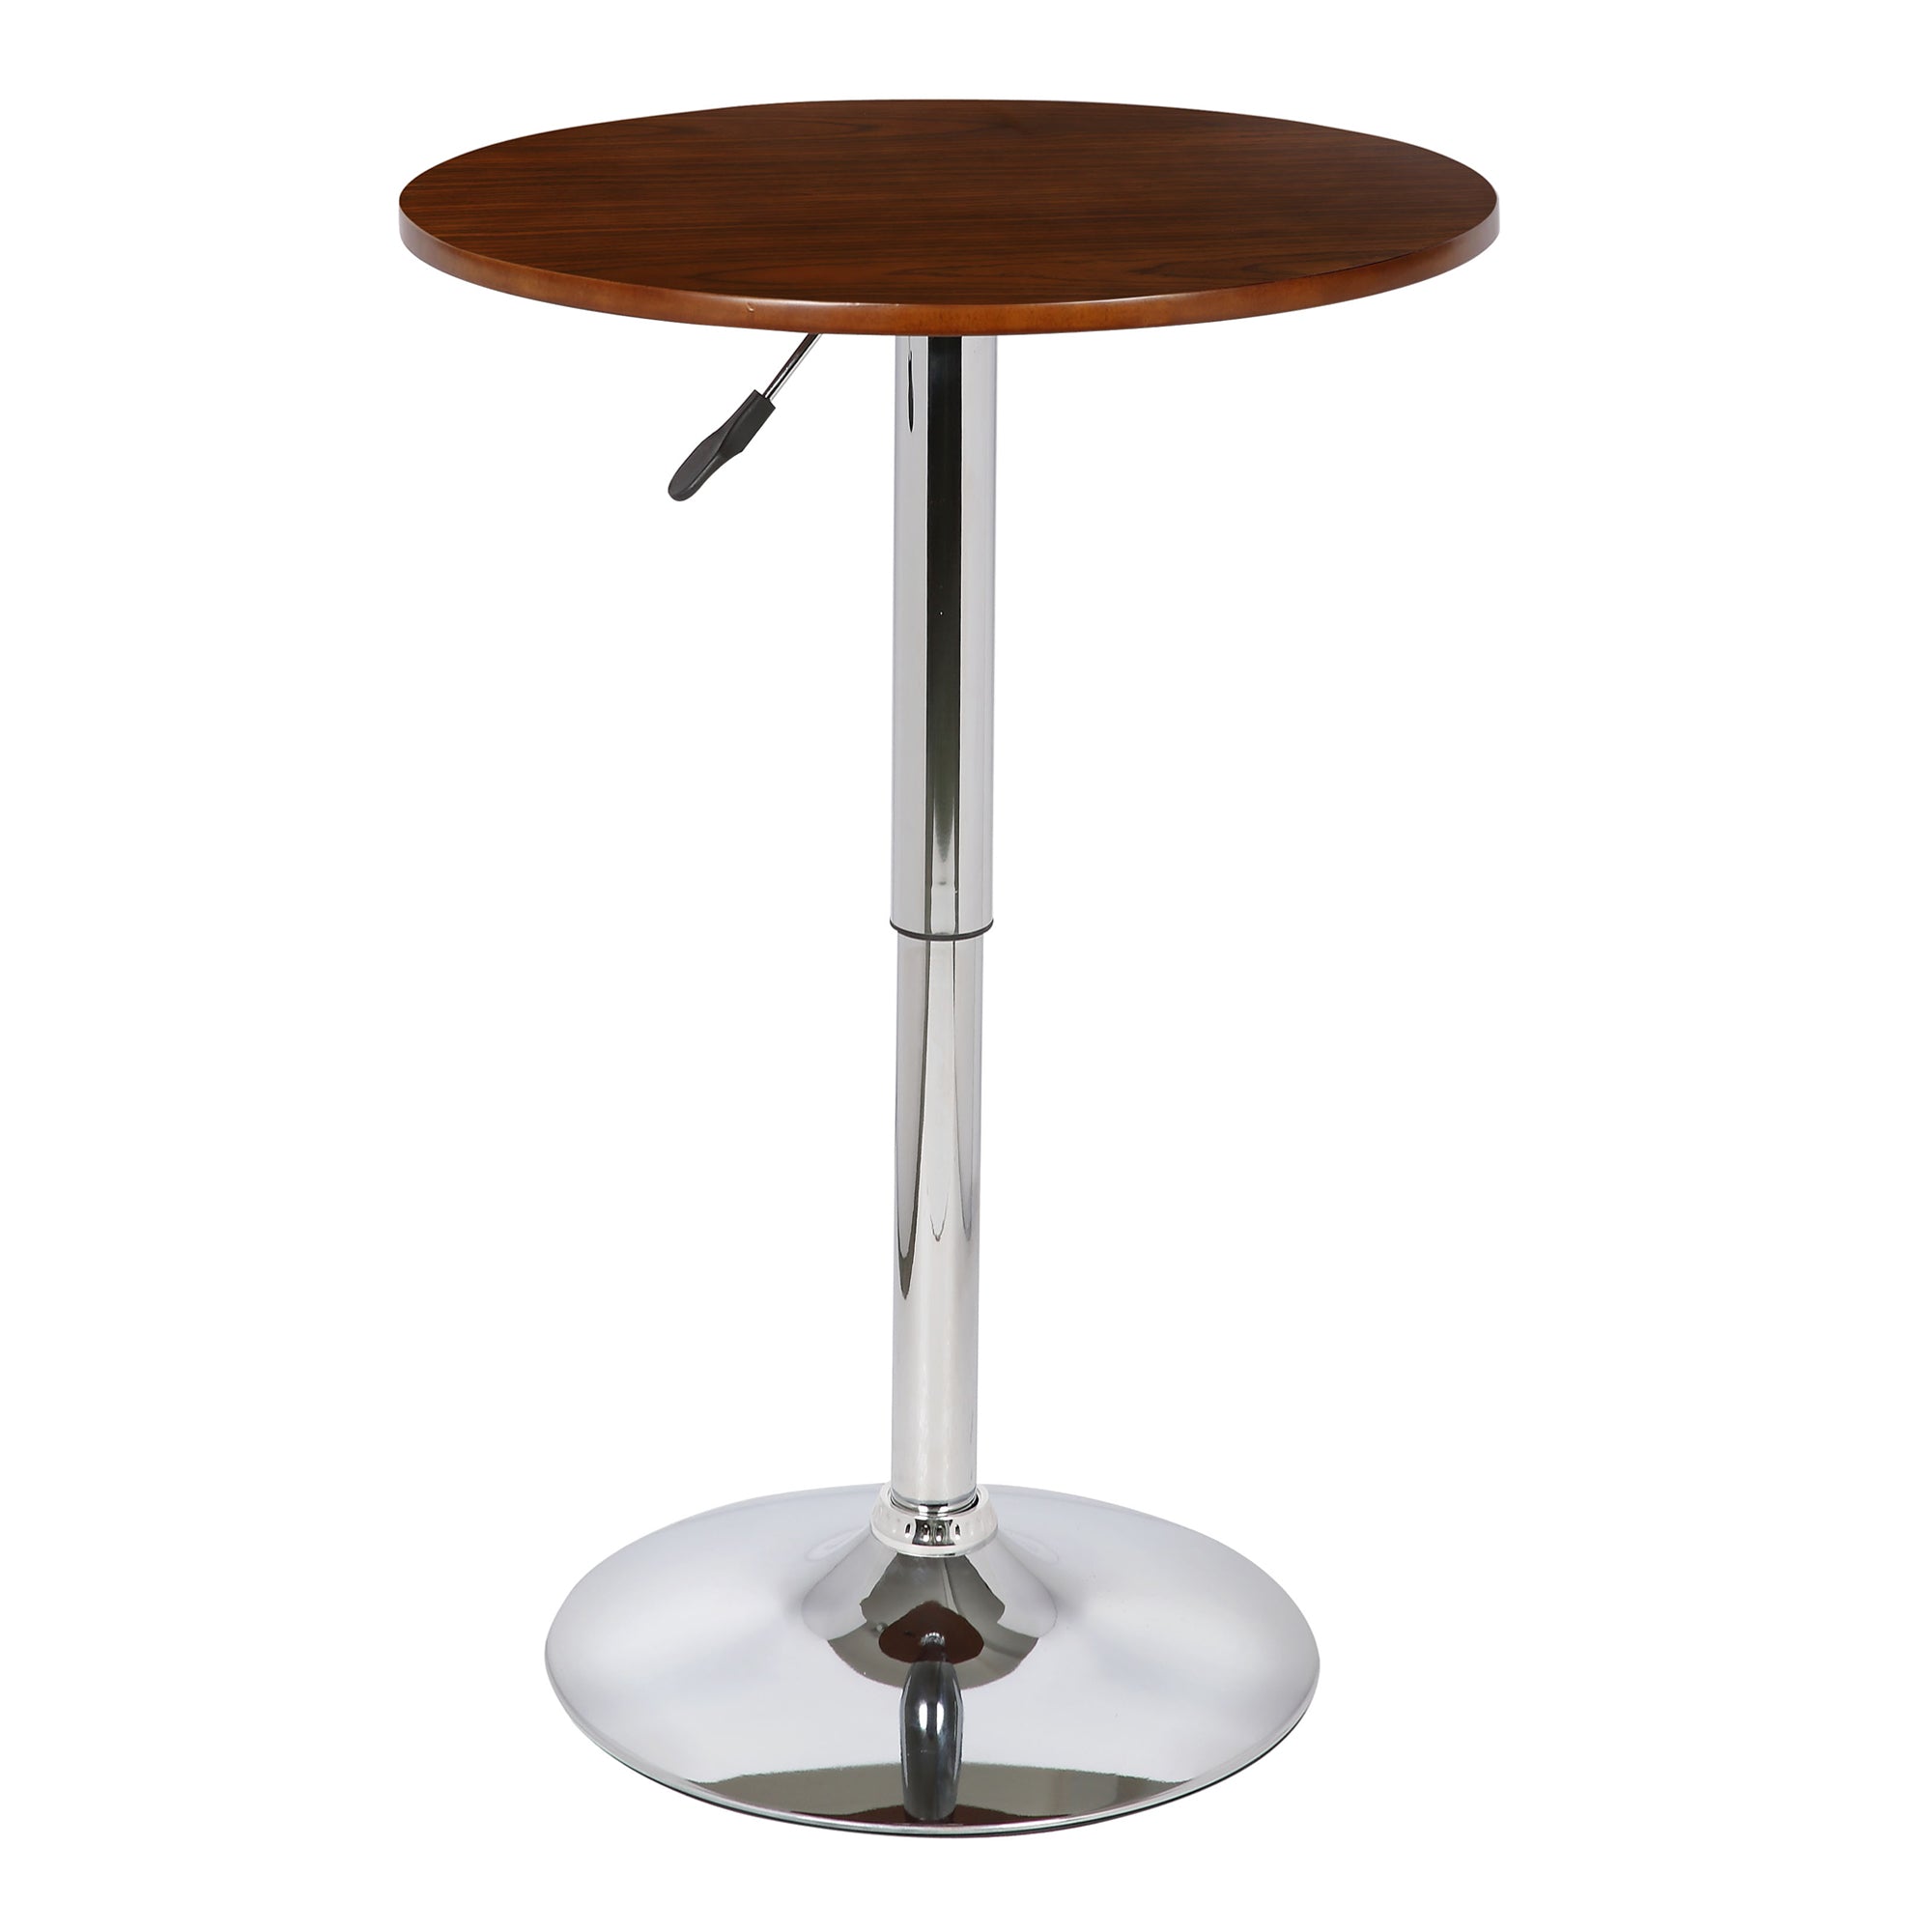 Armen Living Lcbepuwa Bentley Adjustable Pub Table In Walnut Wood And Chrome Finish